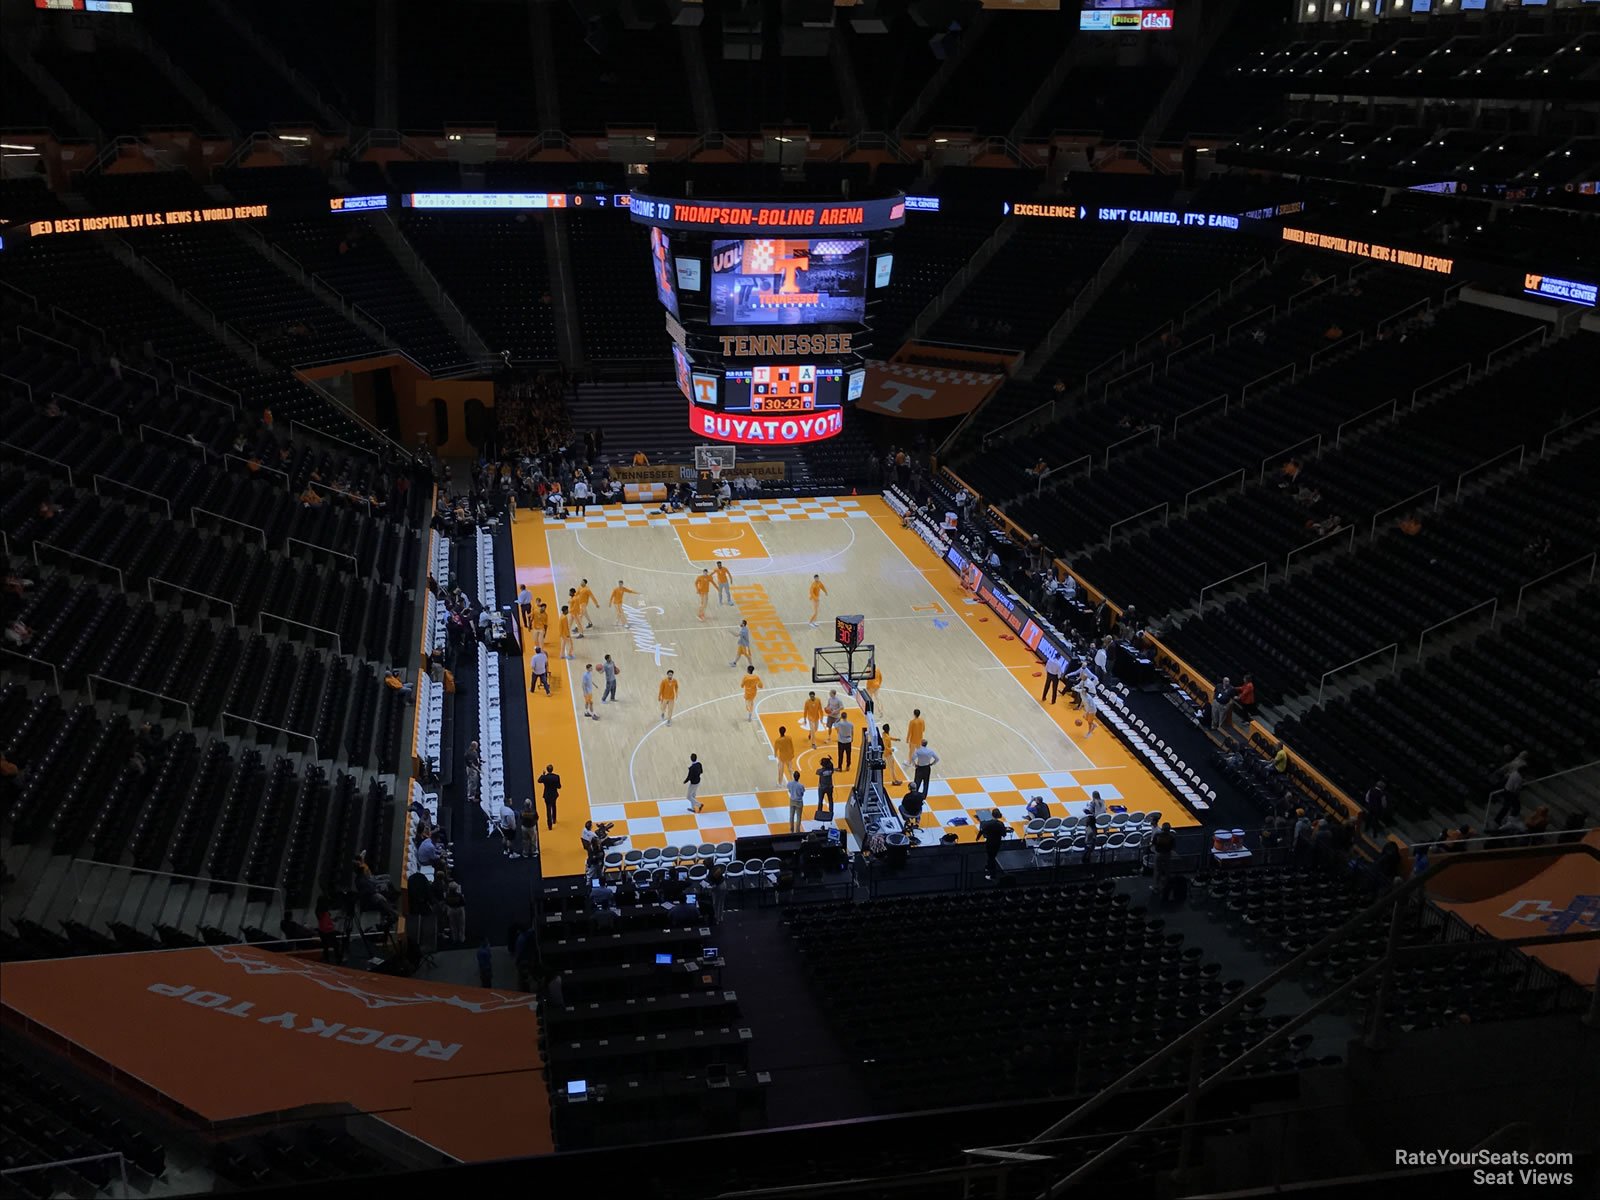 section 314, row 7 seat view  - thompson-boling arena